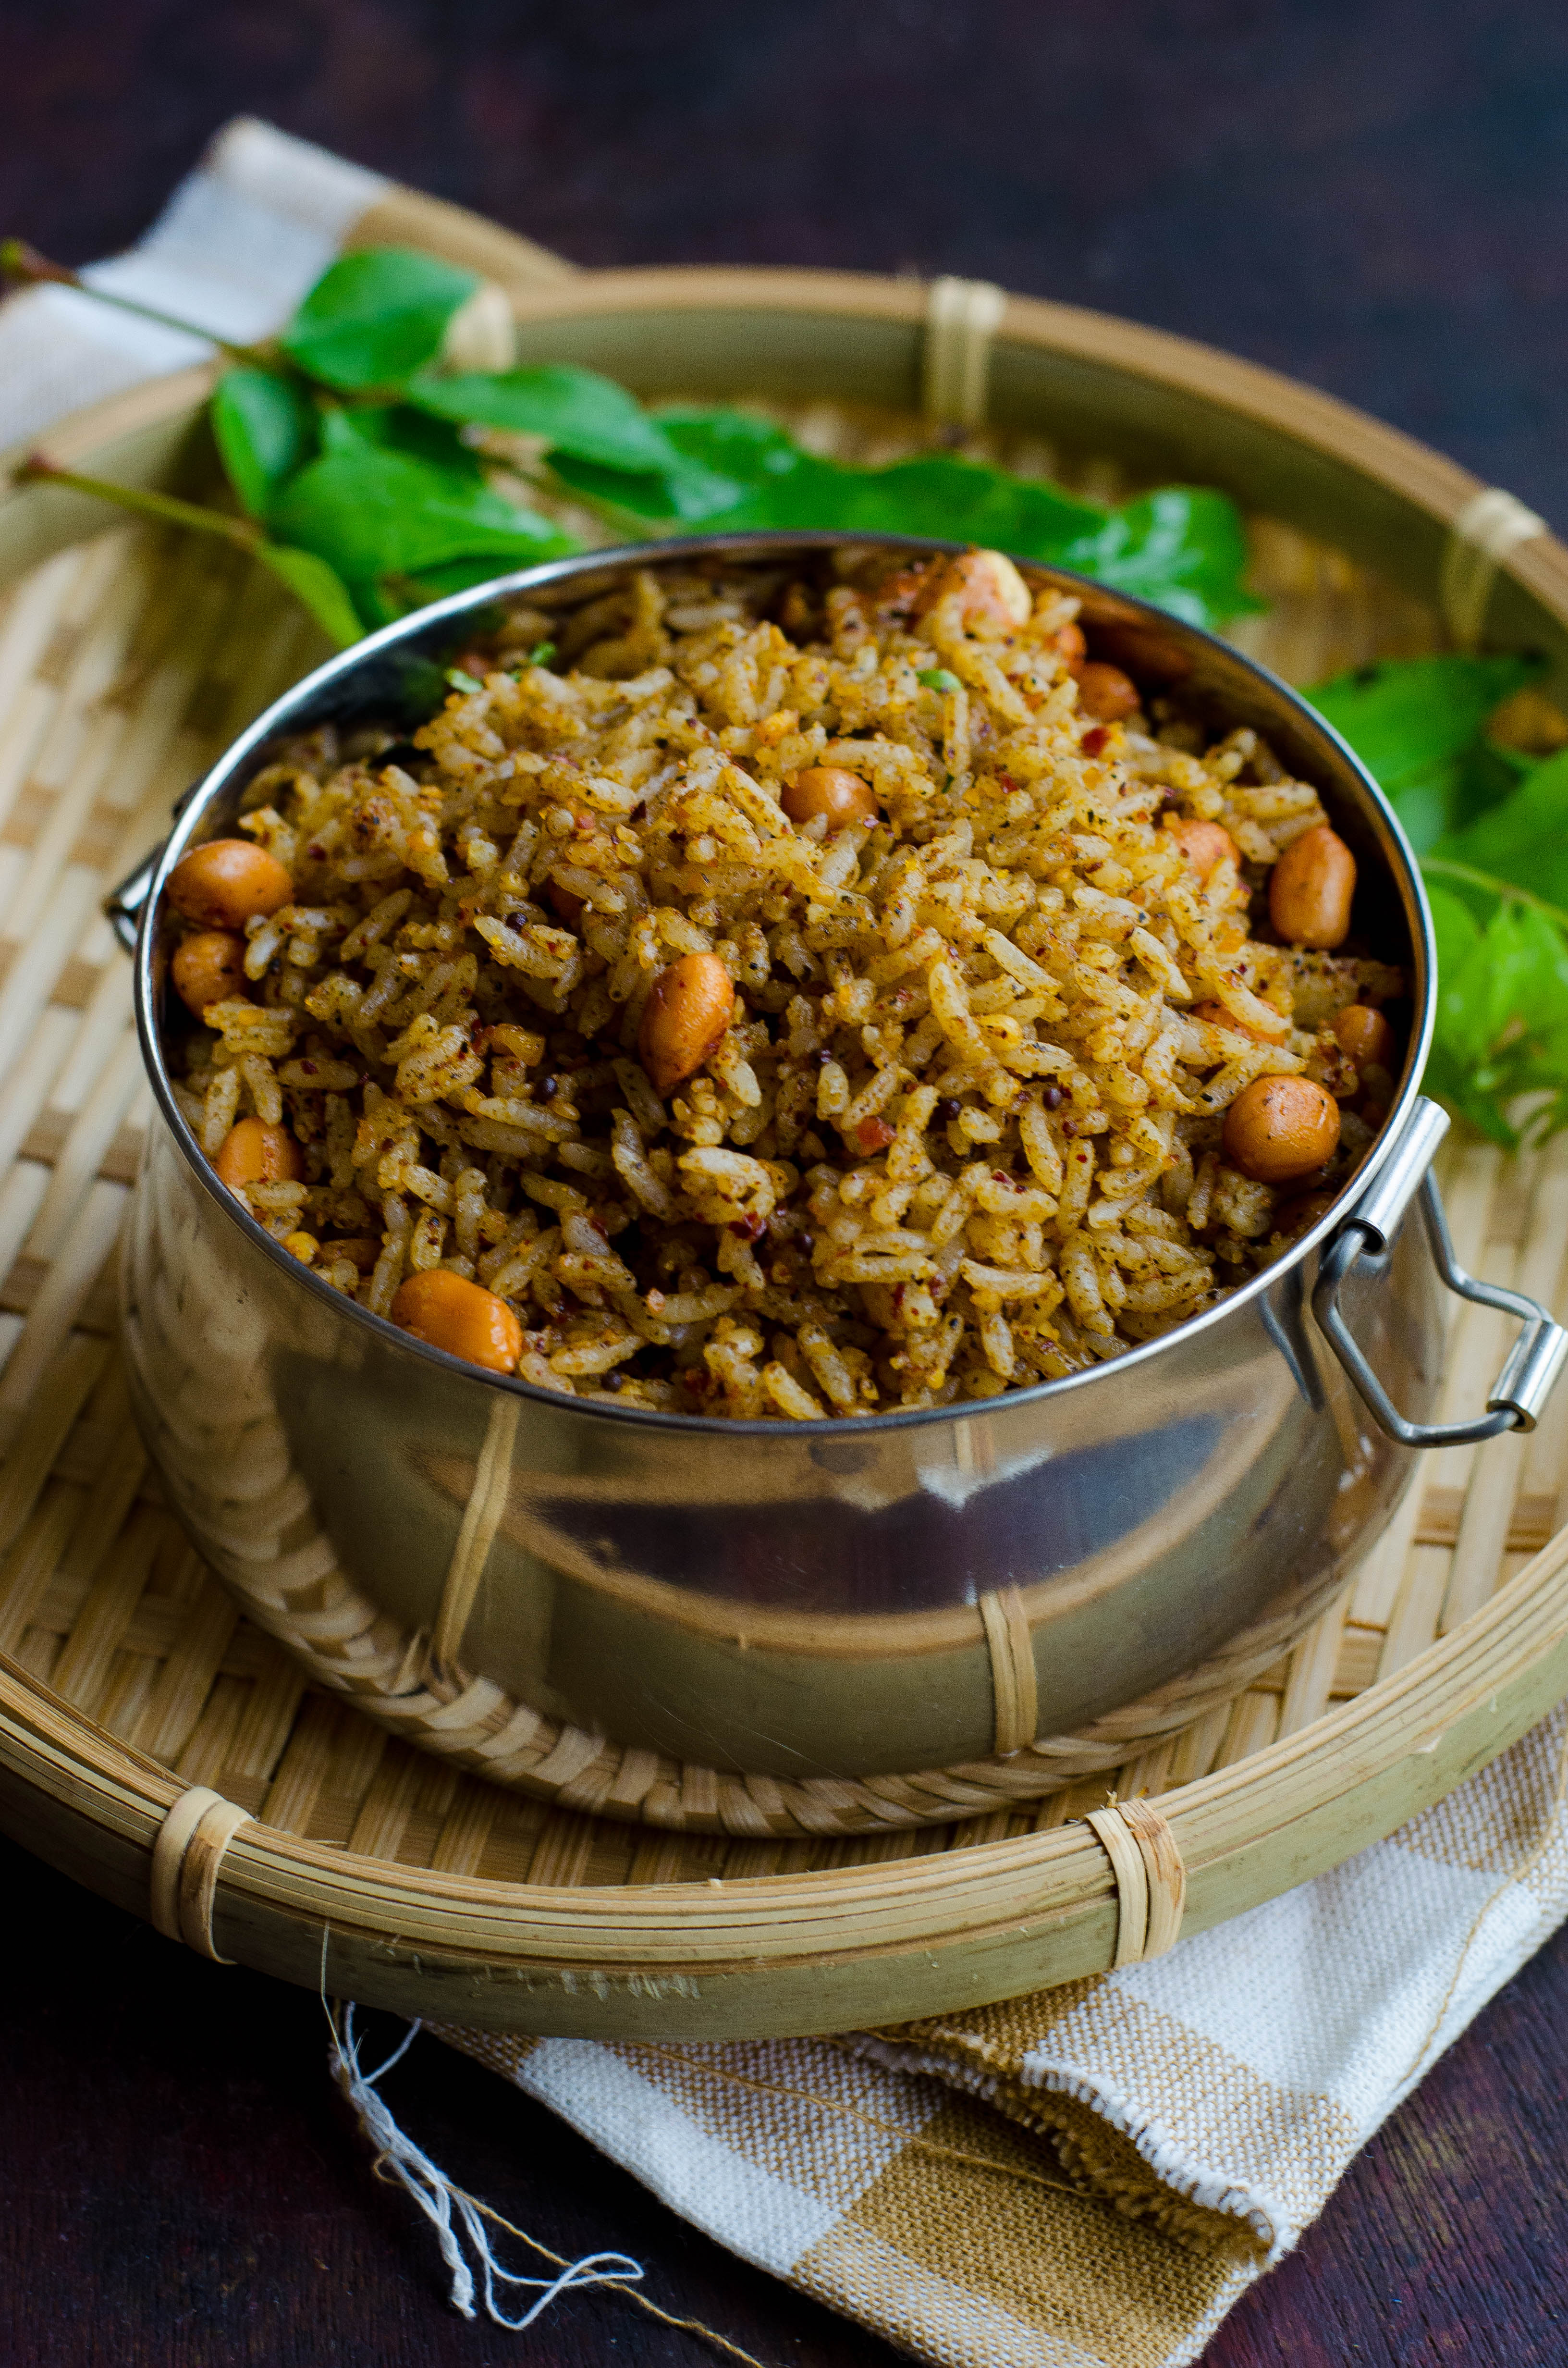 Ellu sadam- A simple vegan rice-based dish made with a sesame seeds based spice mix, served in a tiffin box placed on a bamboo basket against a brown backdrop.